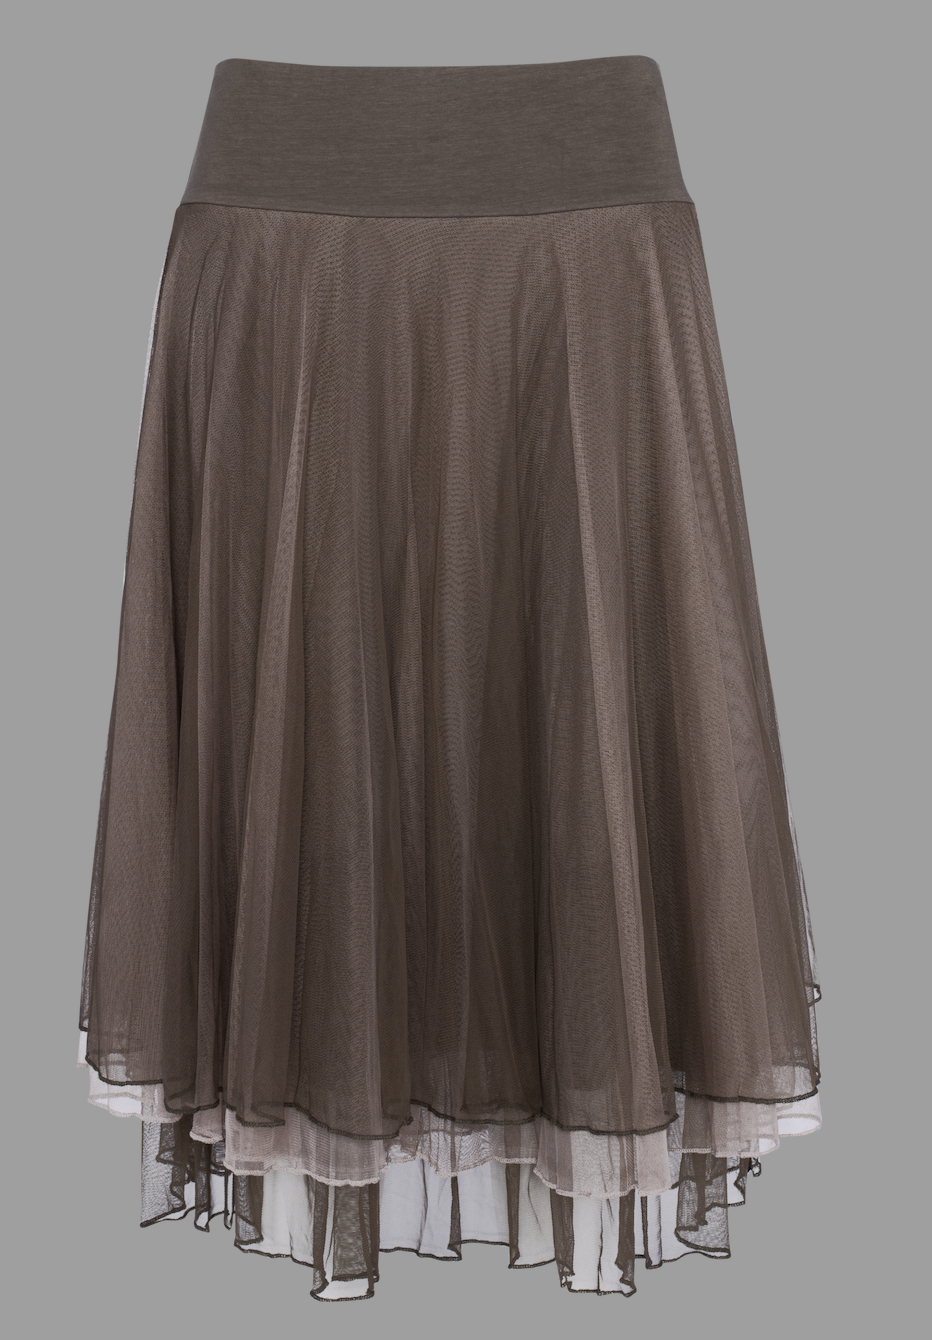 Madeliefje deelnemer frequentie Petticoat 2190 Taupe - LaLamour - Indeed Fashion